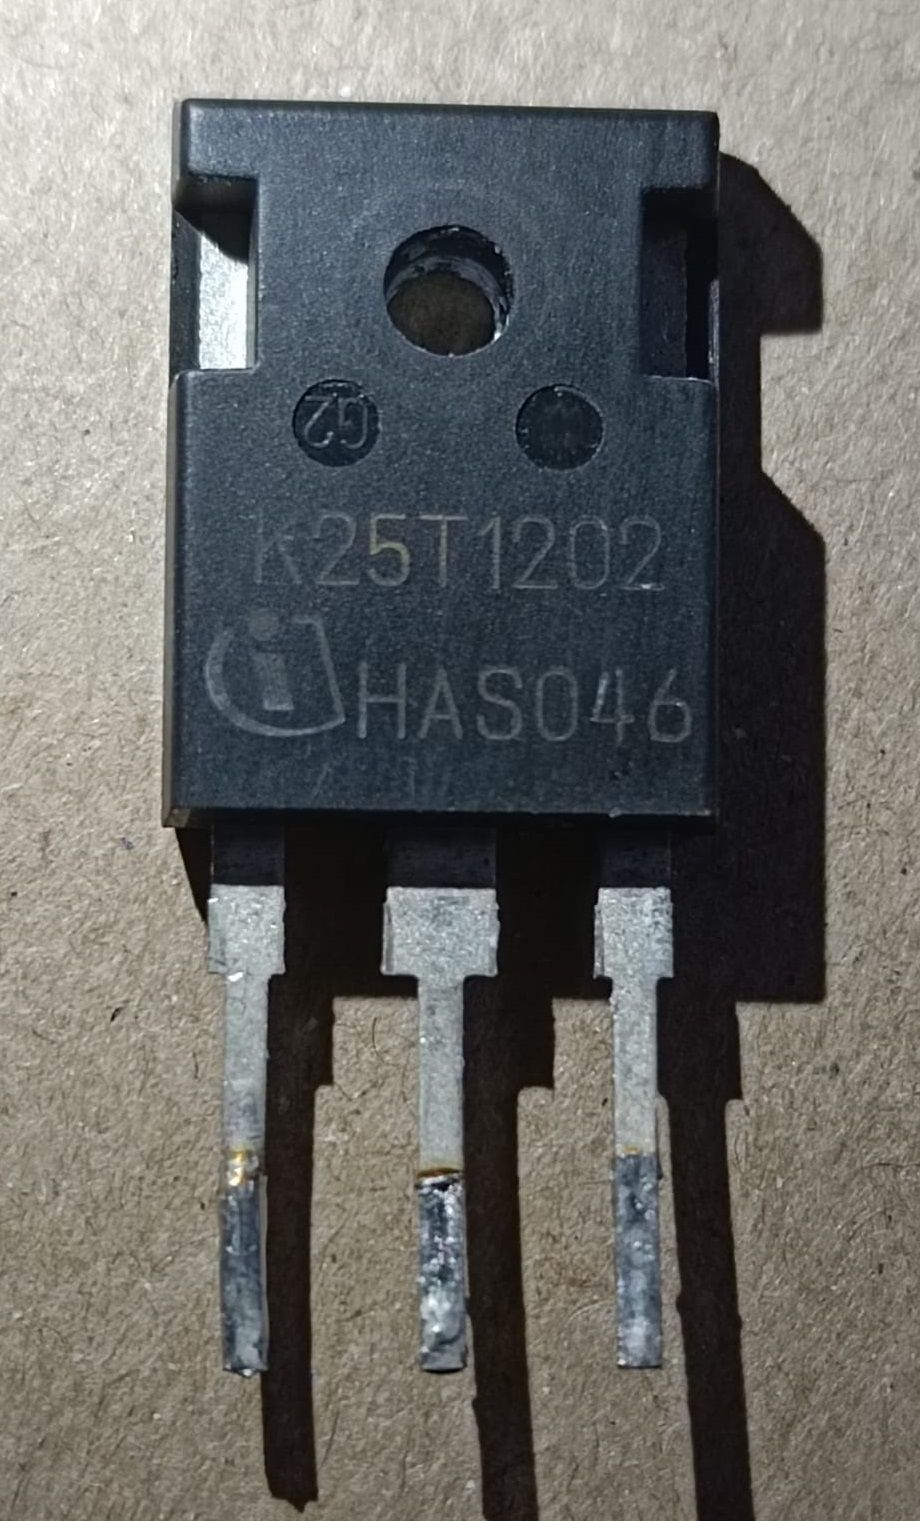 IKW25N120T2 - (K25T1202) TO-247-3 25A 1200V IGBT TRANSISTOR